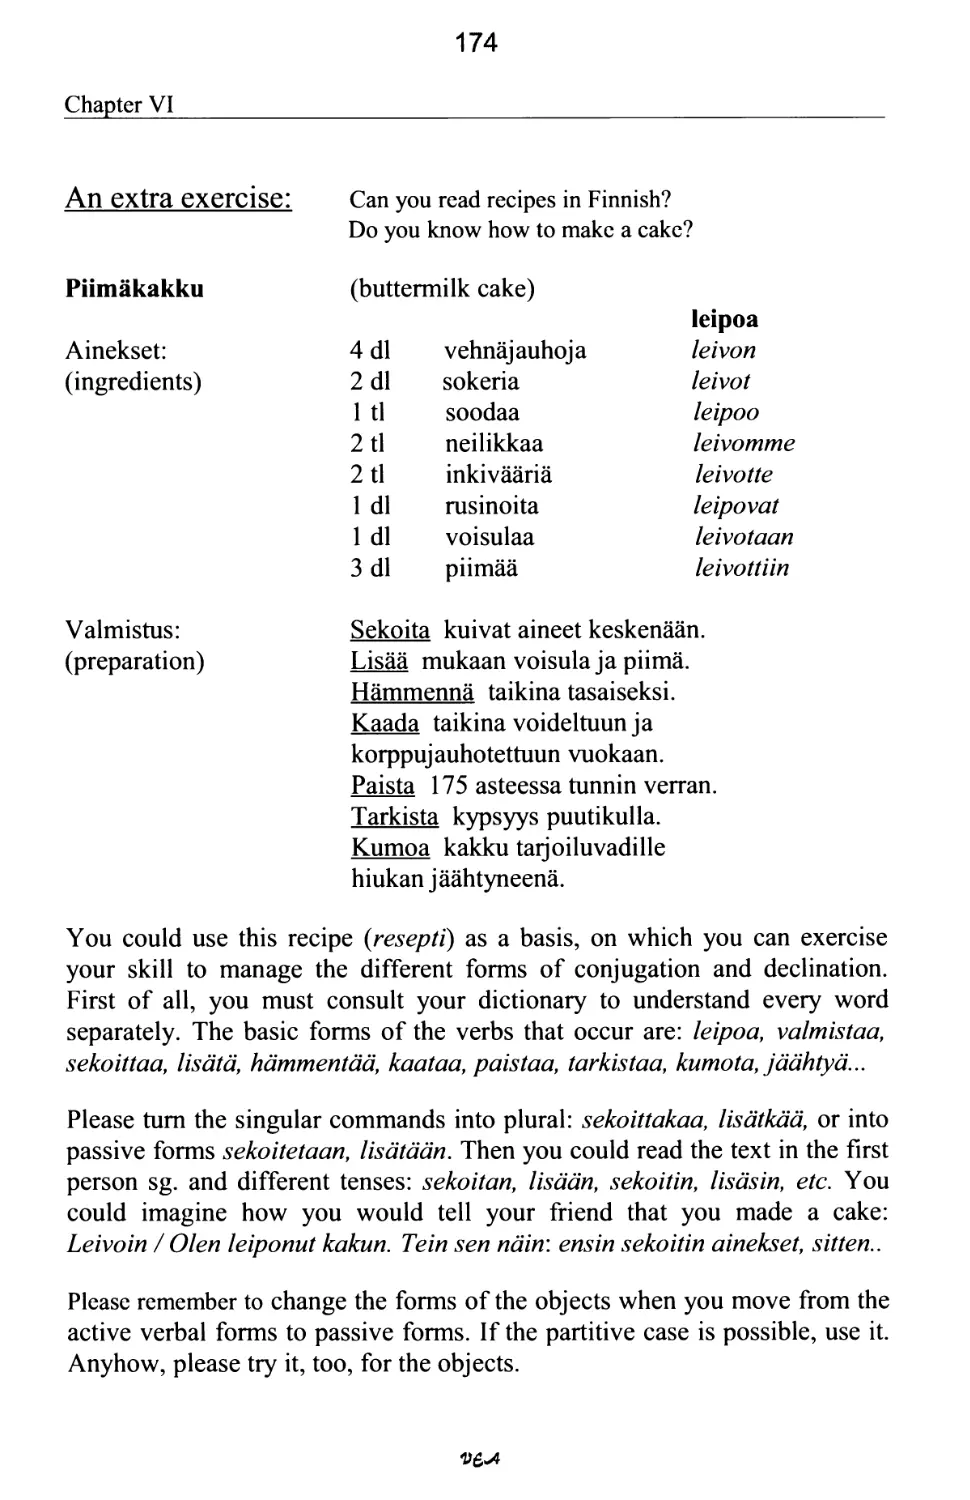 An extra exercise: Can you read recipes in Finnish?